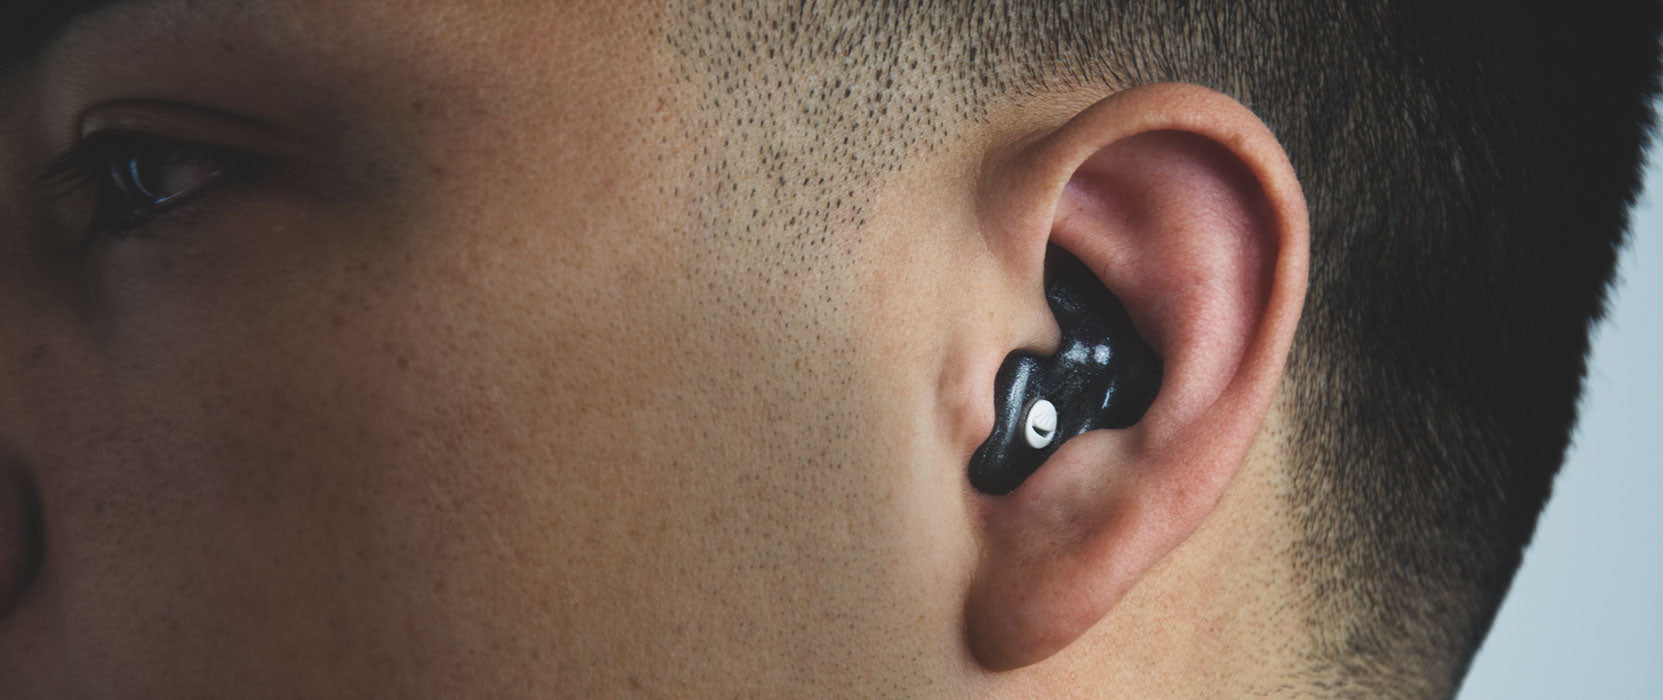 Close-up of the side of a person's face showing an ear with a black wireless earbud.